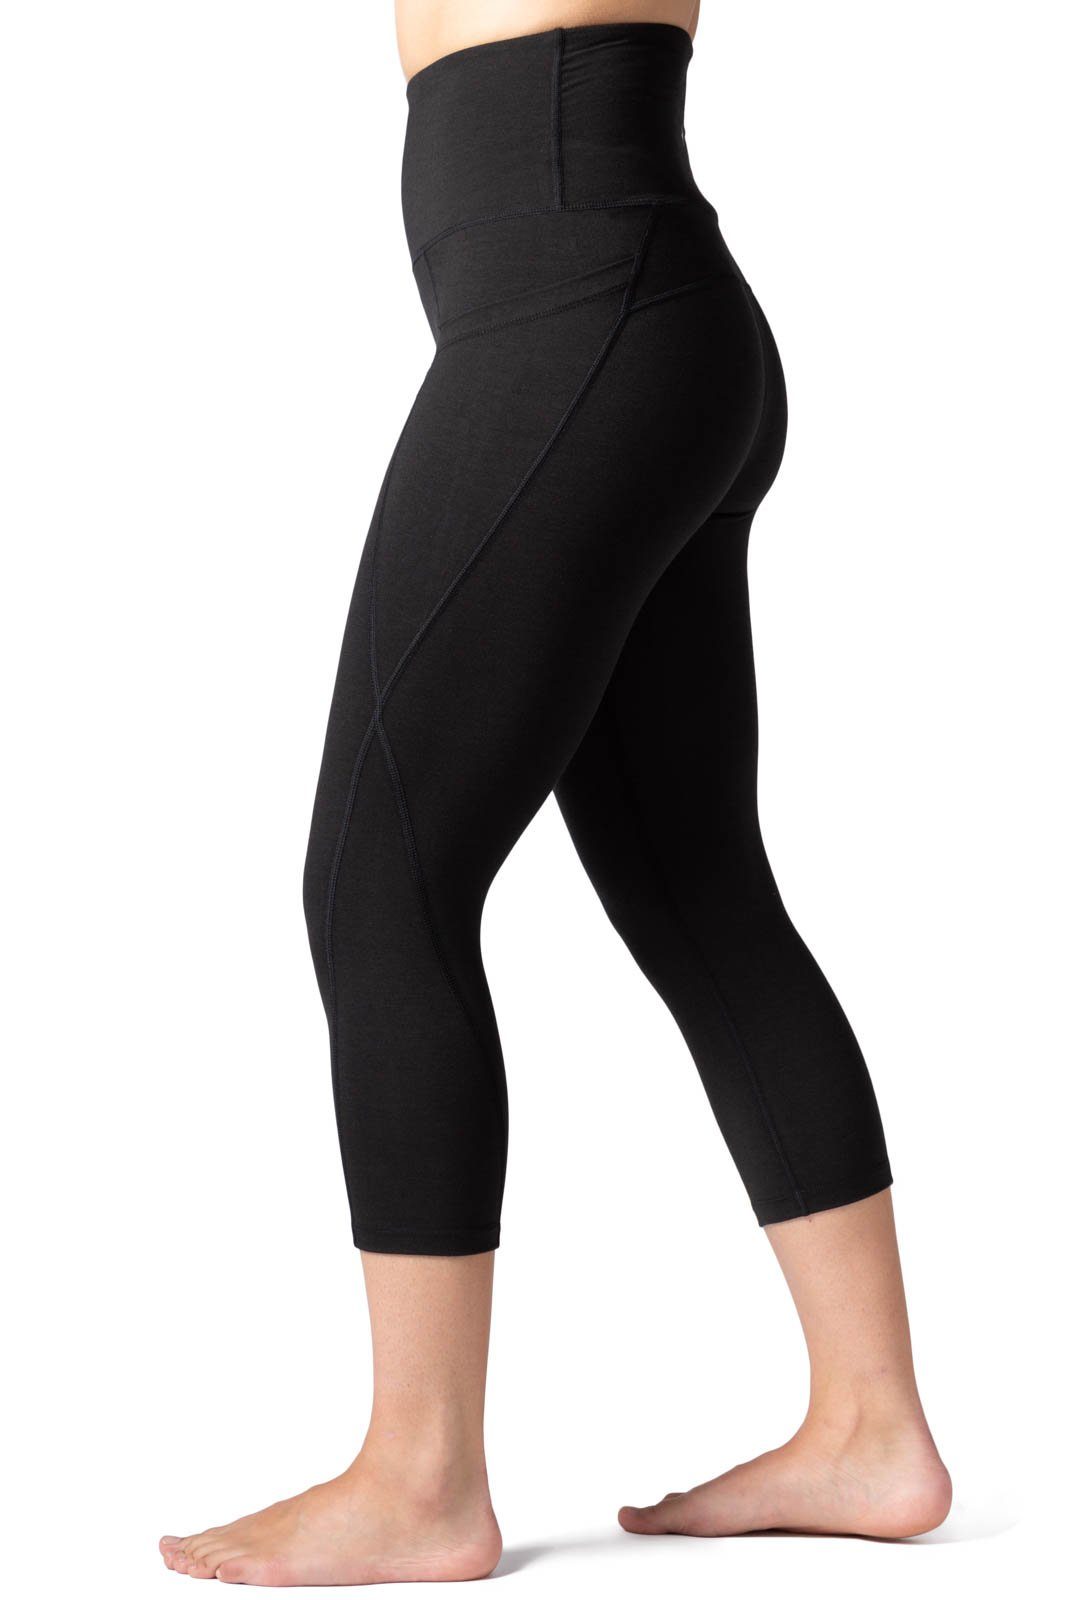 High Waist Capri Workout Pants Women In For Women Perfect For Yoga,  Running, And Fitness Gym Calf Length Leggings For Girls And Women From  Elroyelissa, $19.52